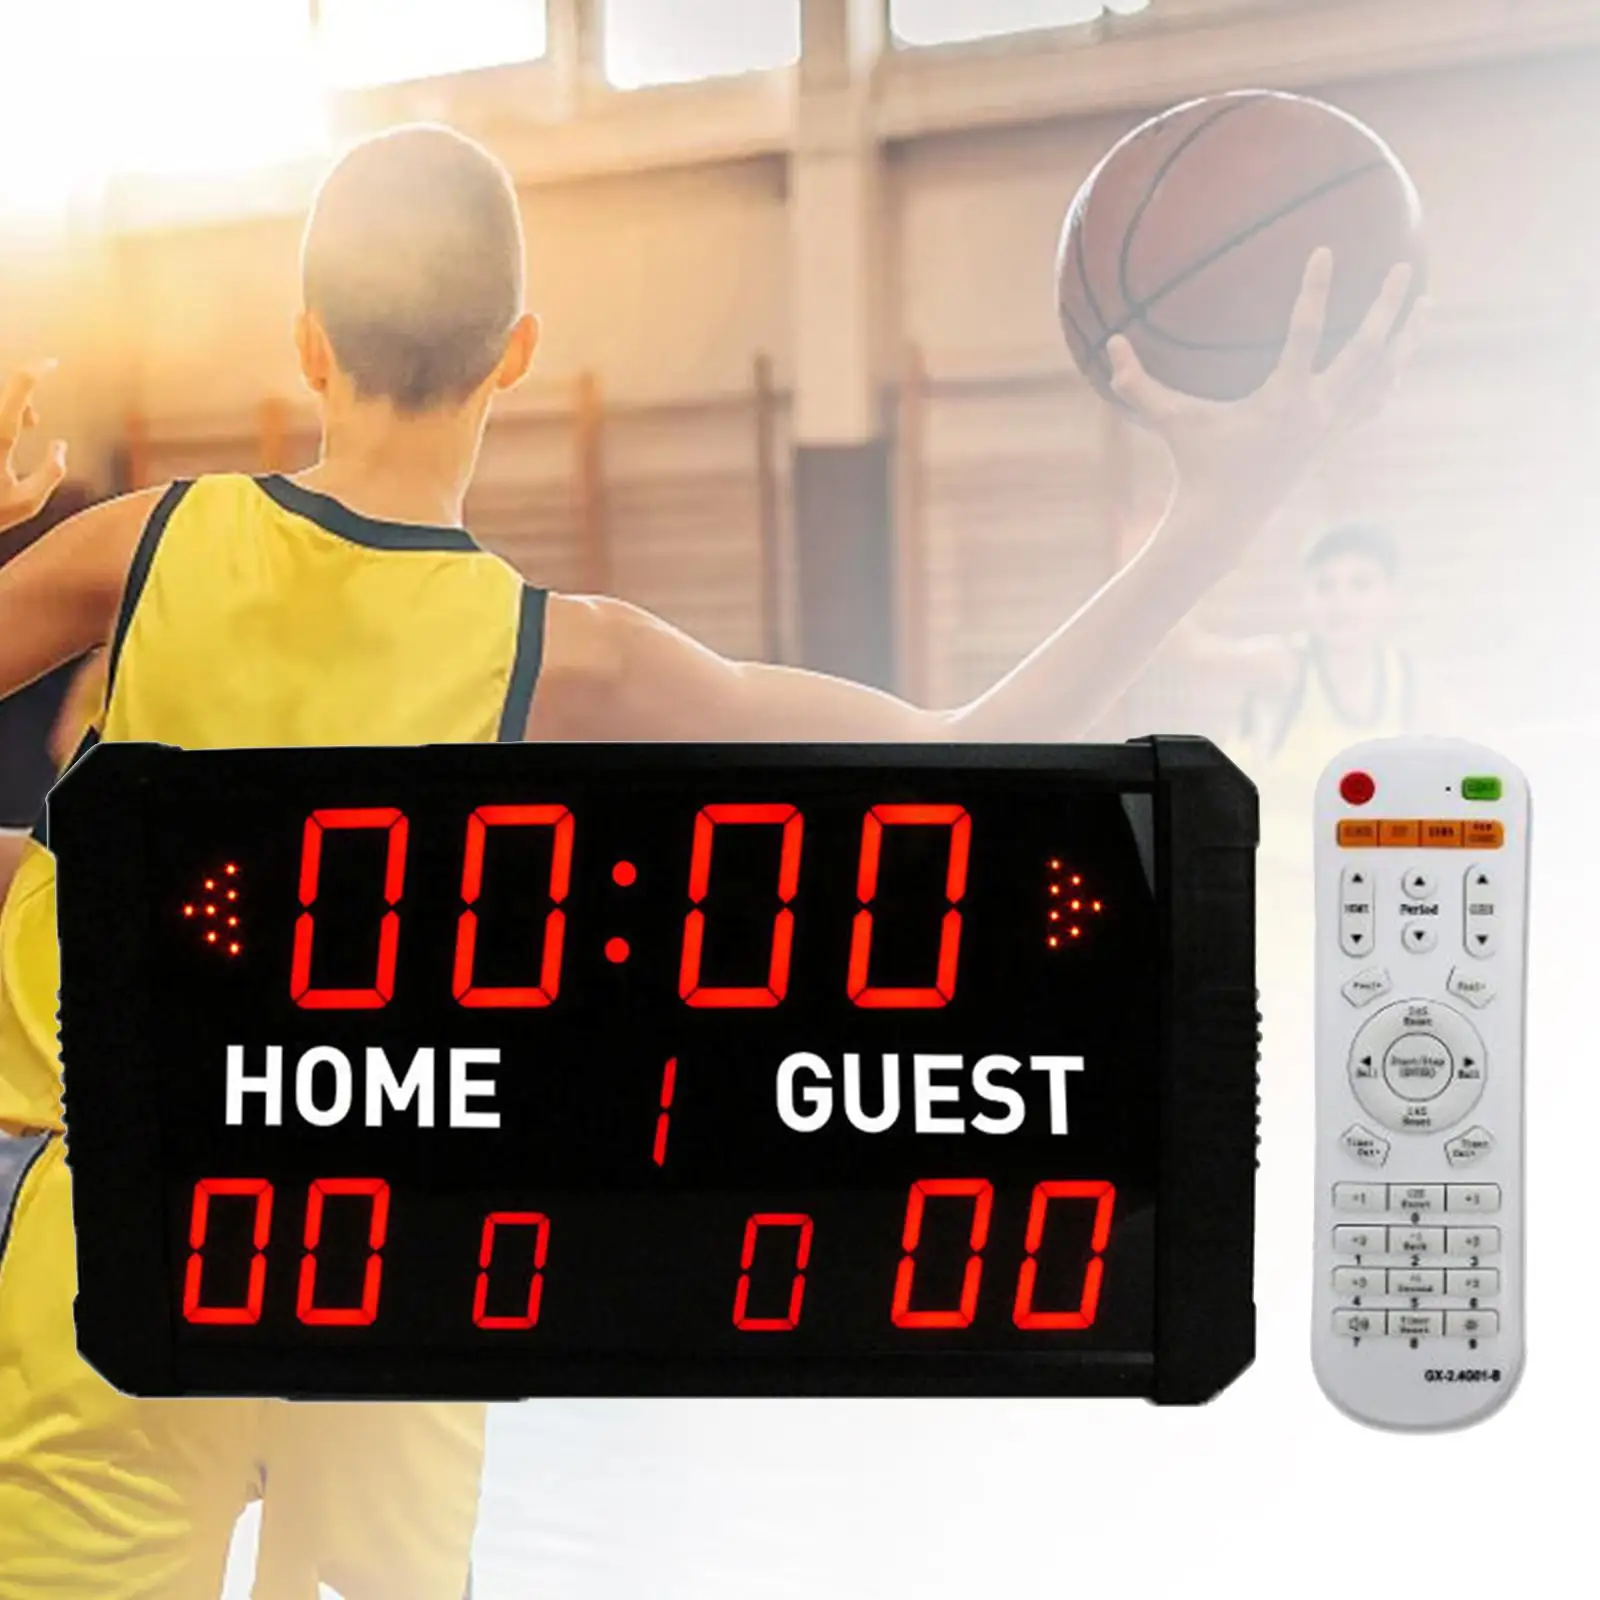 Basketball 24 Seconds Shot Scoreboard Plug Type US , Black Professional Easy to Use Multiple Functions Bright LED Display